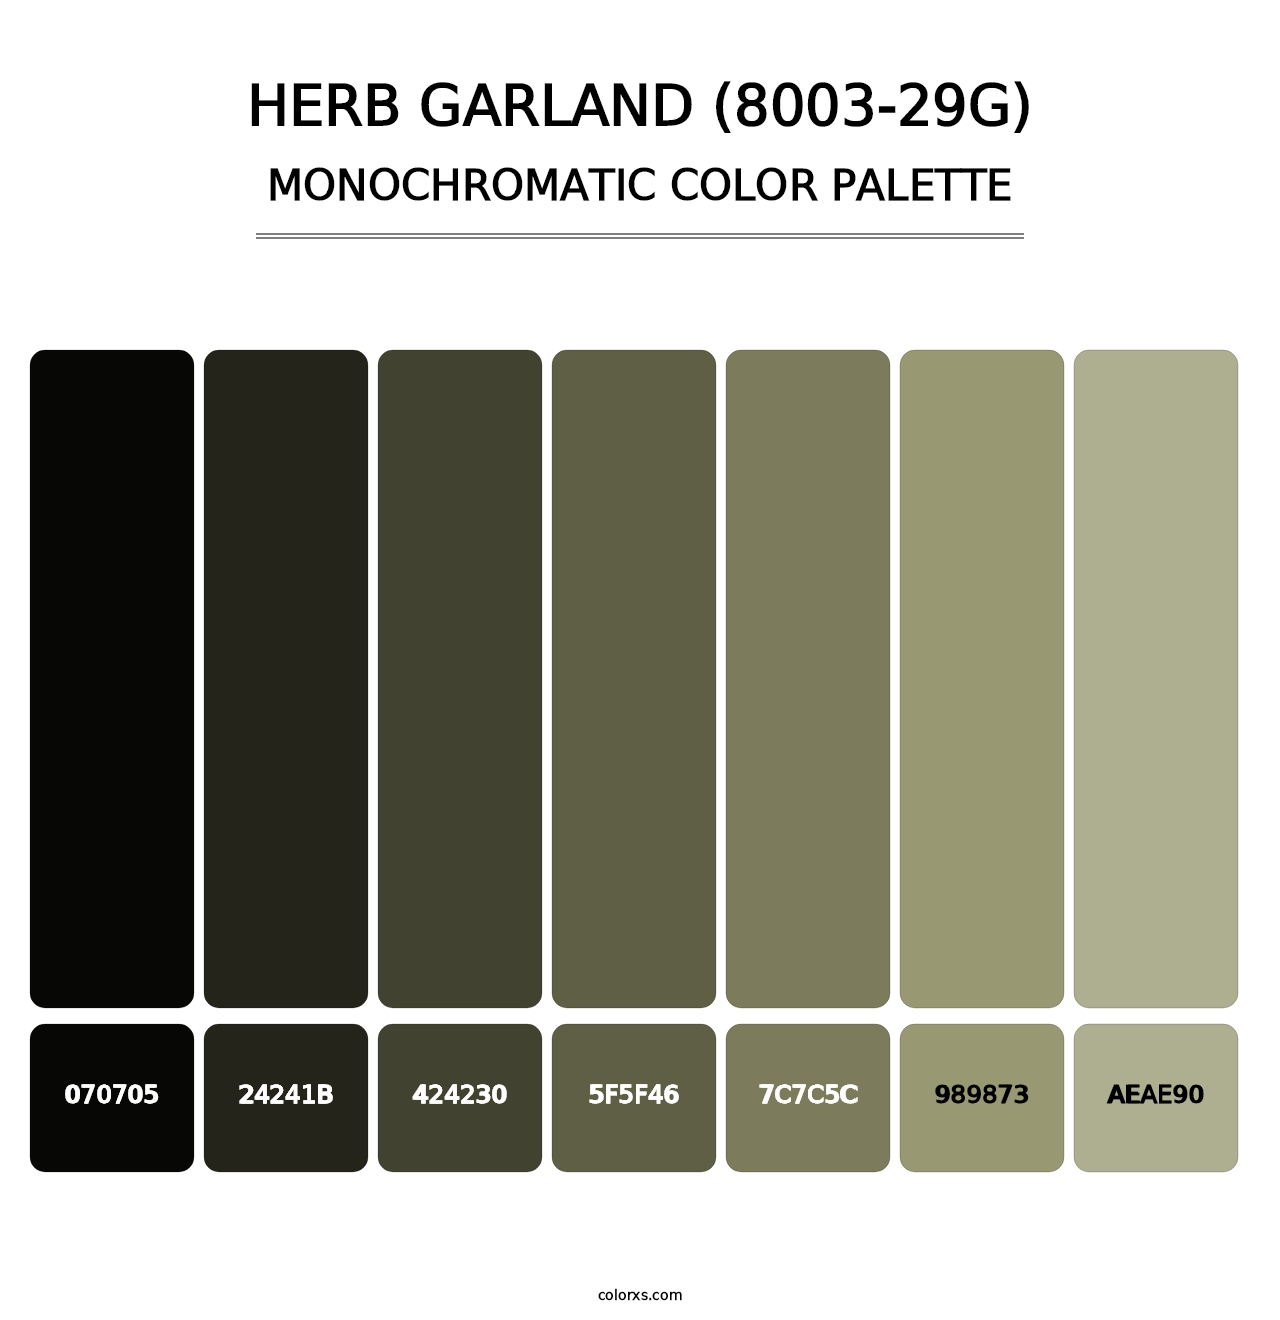 Herb Garland (8003-29G) - Monochromatic Color Palette